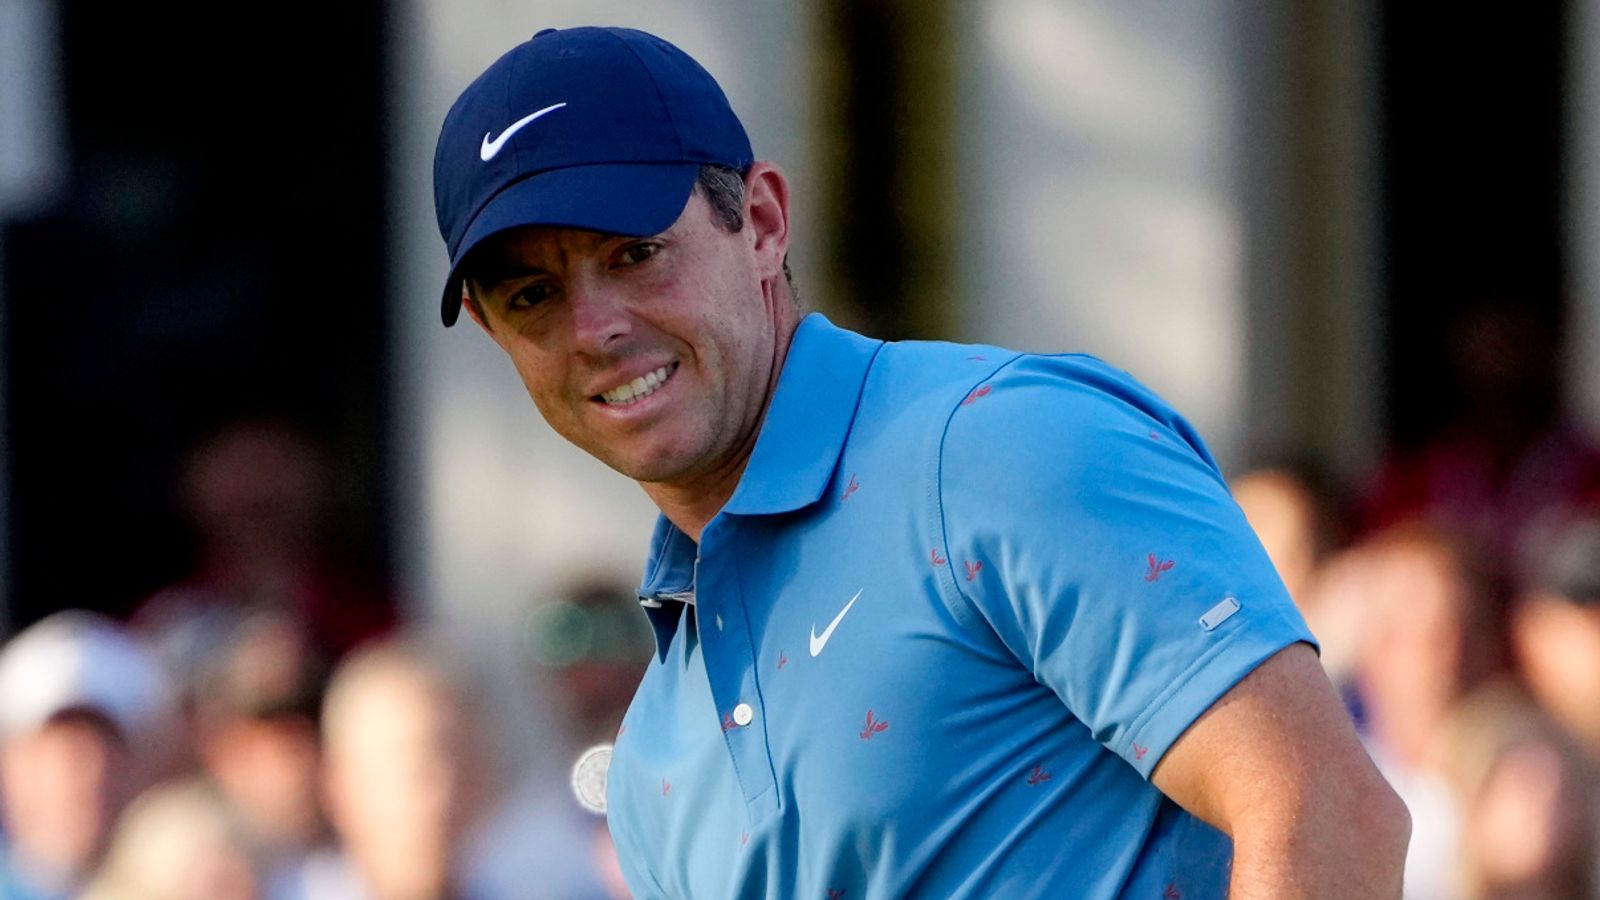 US Open: Rory McIlroy ‘couldn’t be happier’ as second round recovery sees him one shot off the lead